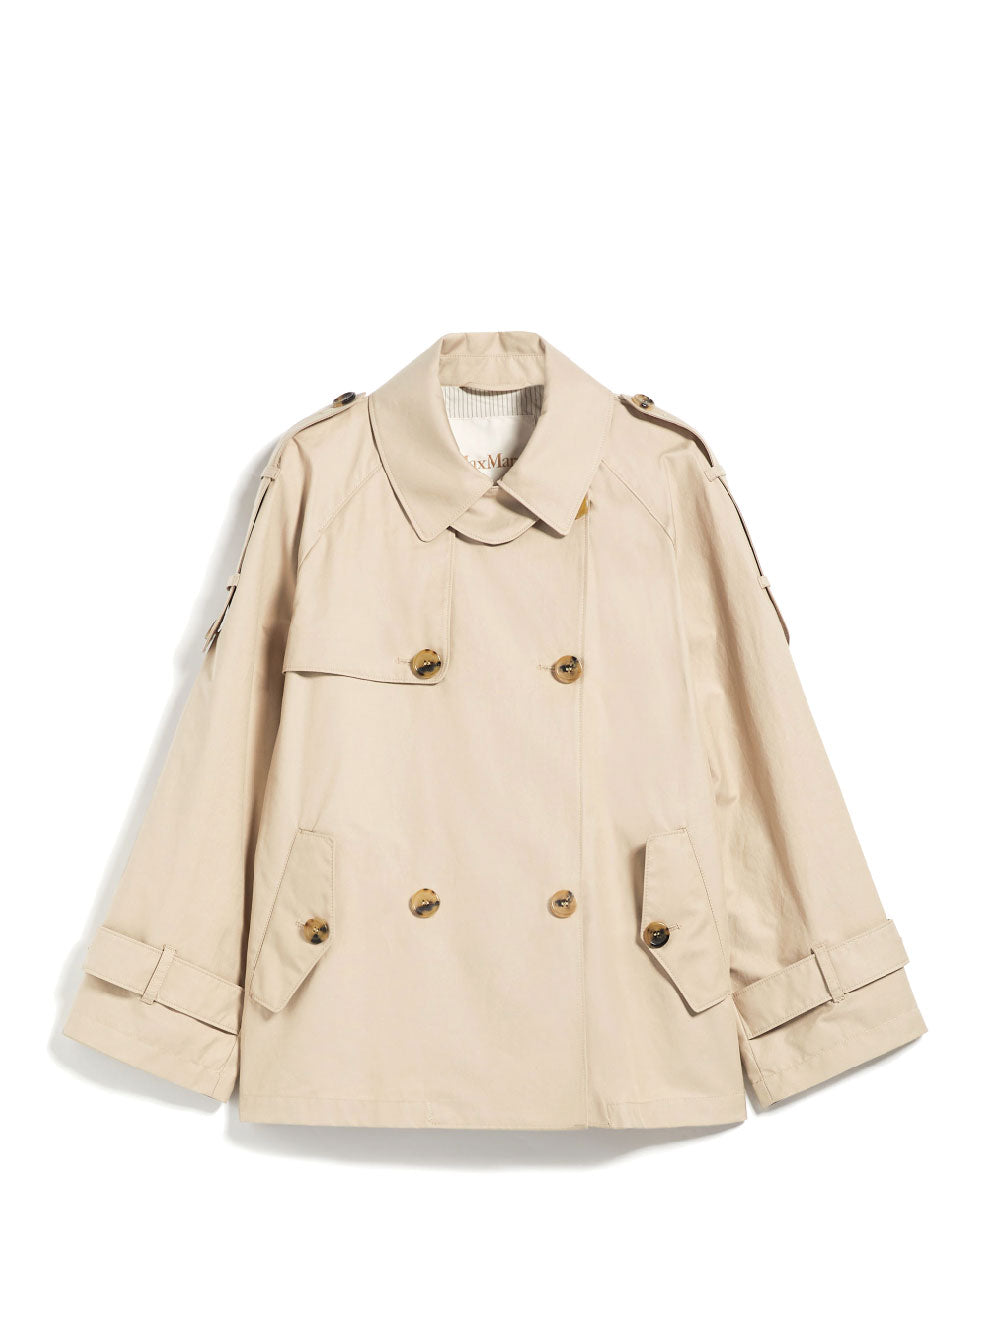 Dtrench short trench coat